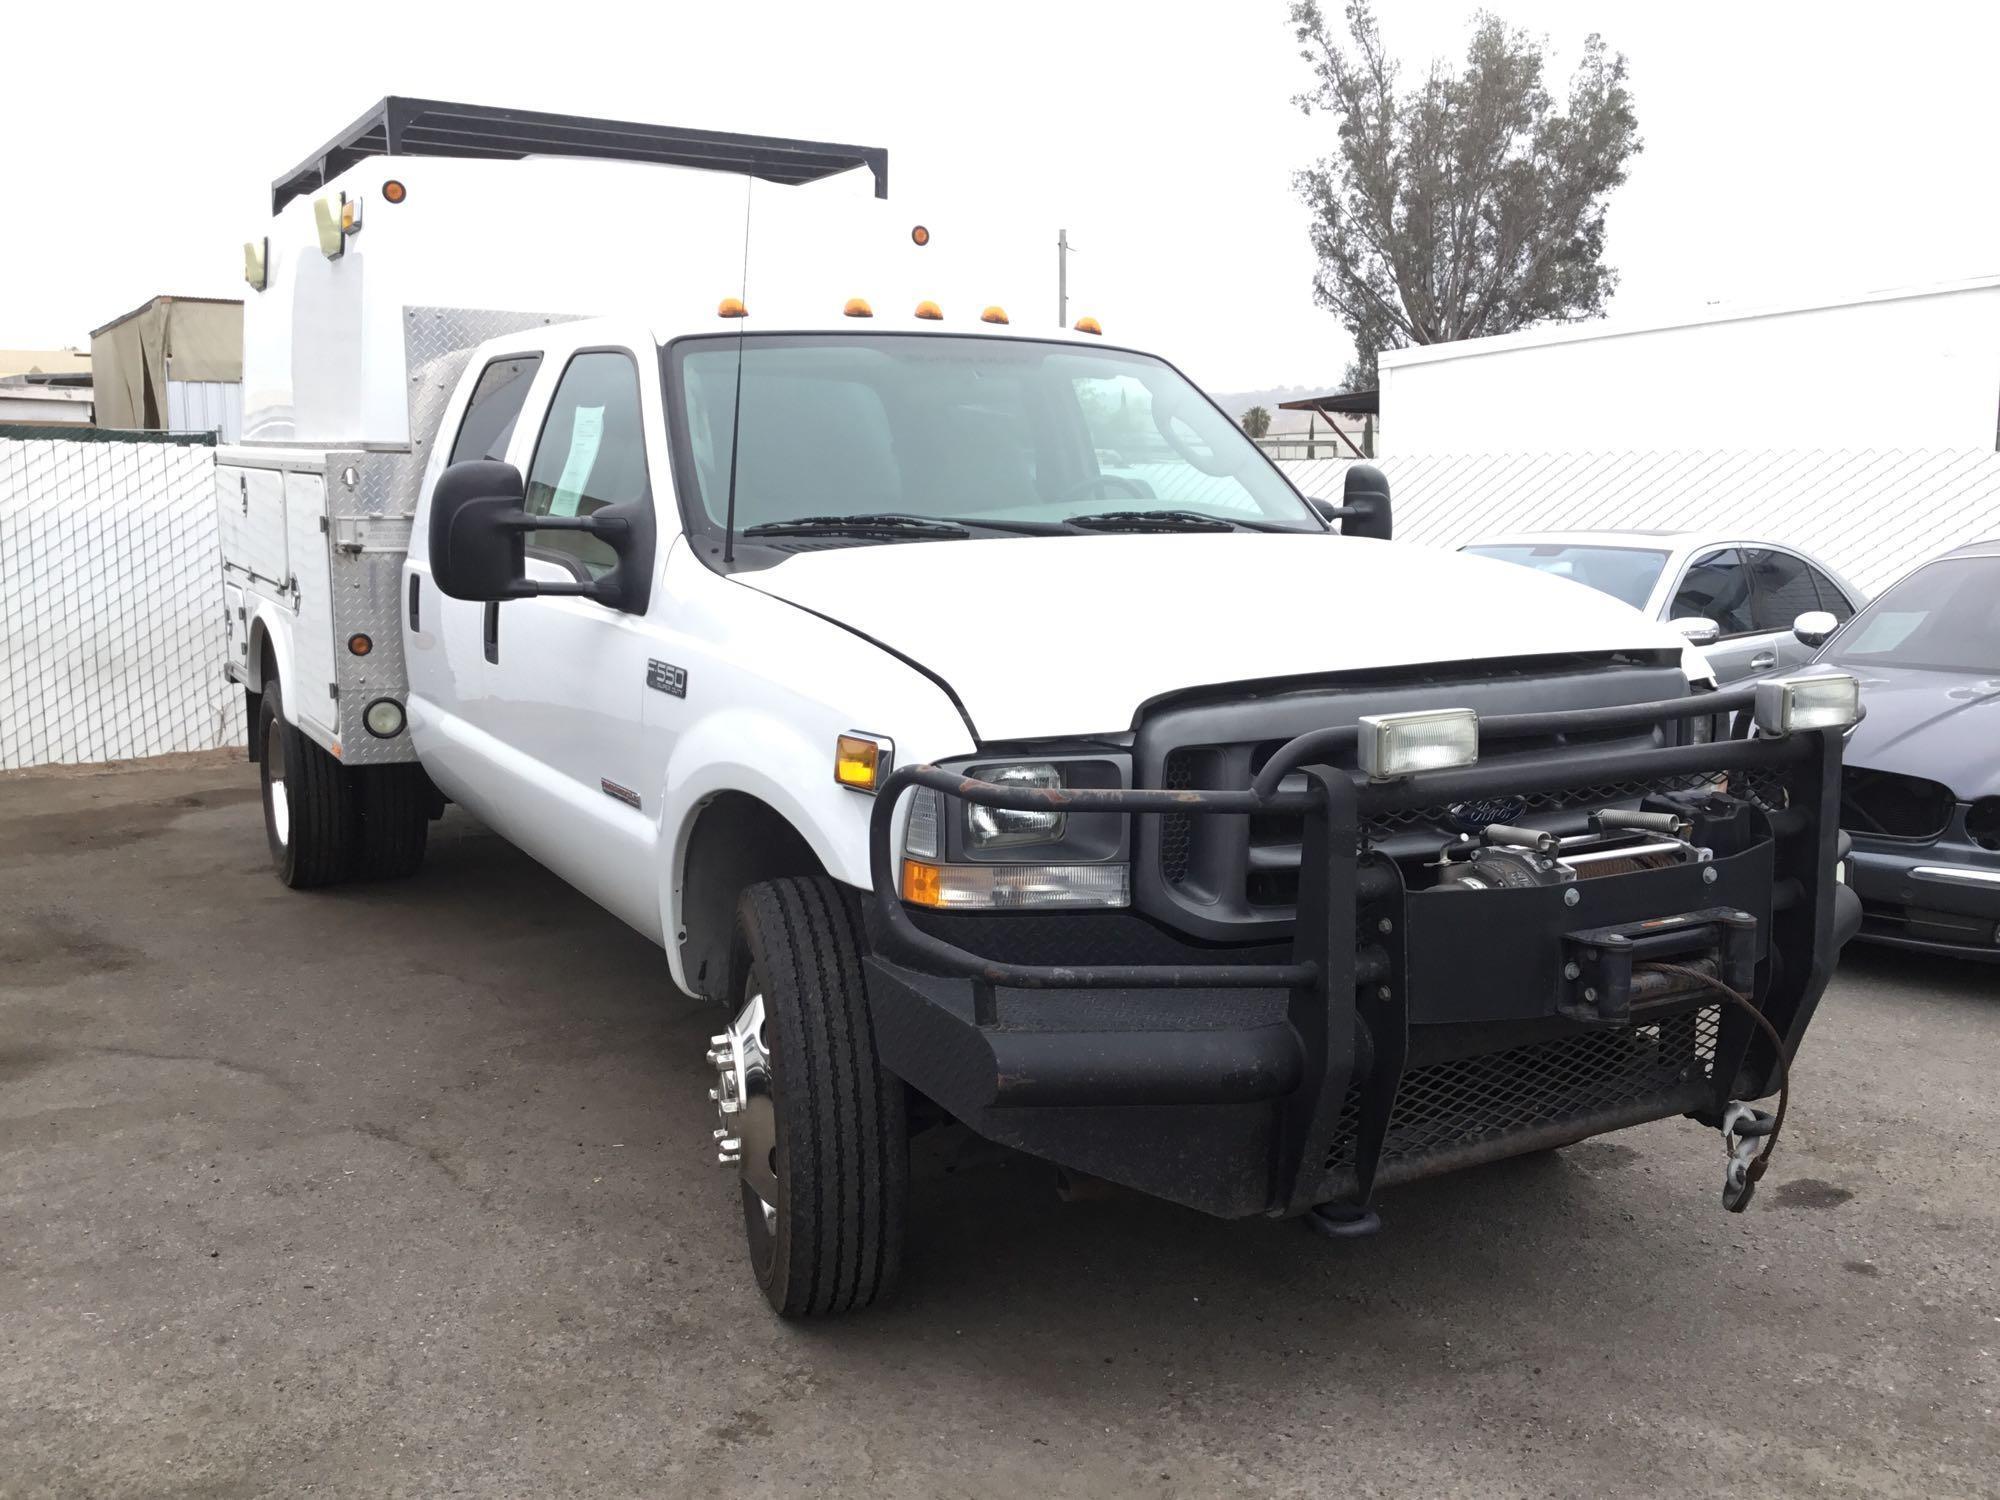 2003 Ford F-550 Super Duty diesel 4x4 crew cab with S and S Fire Apparatus fiberglass body